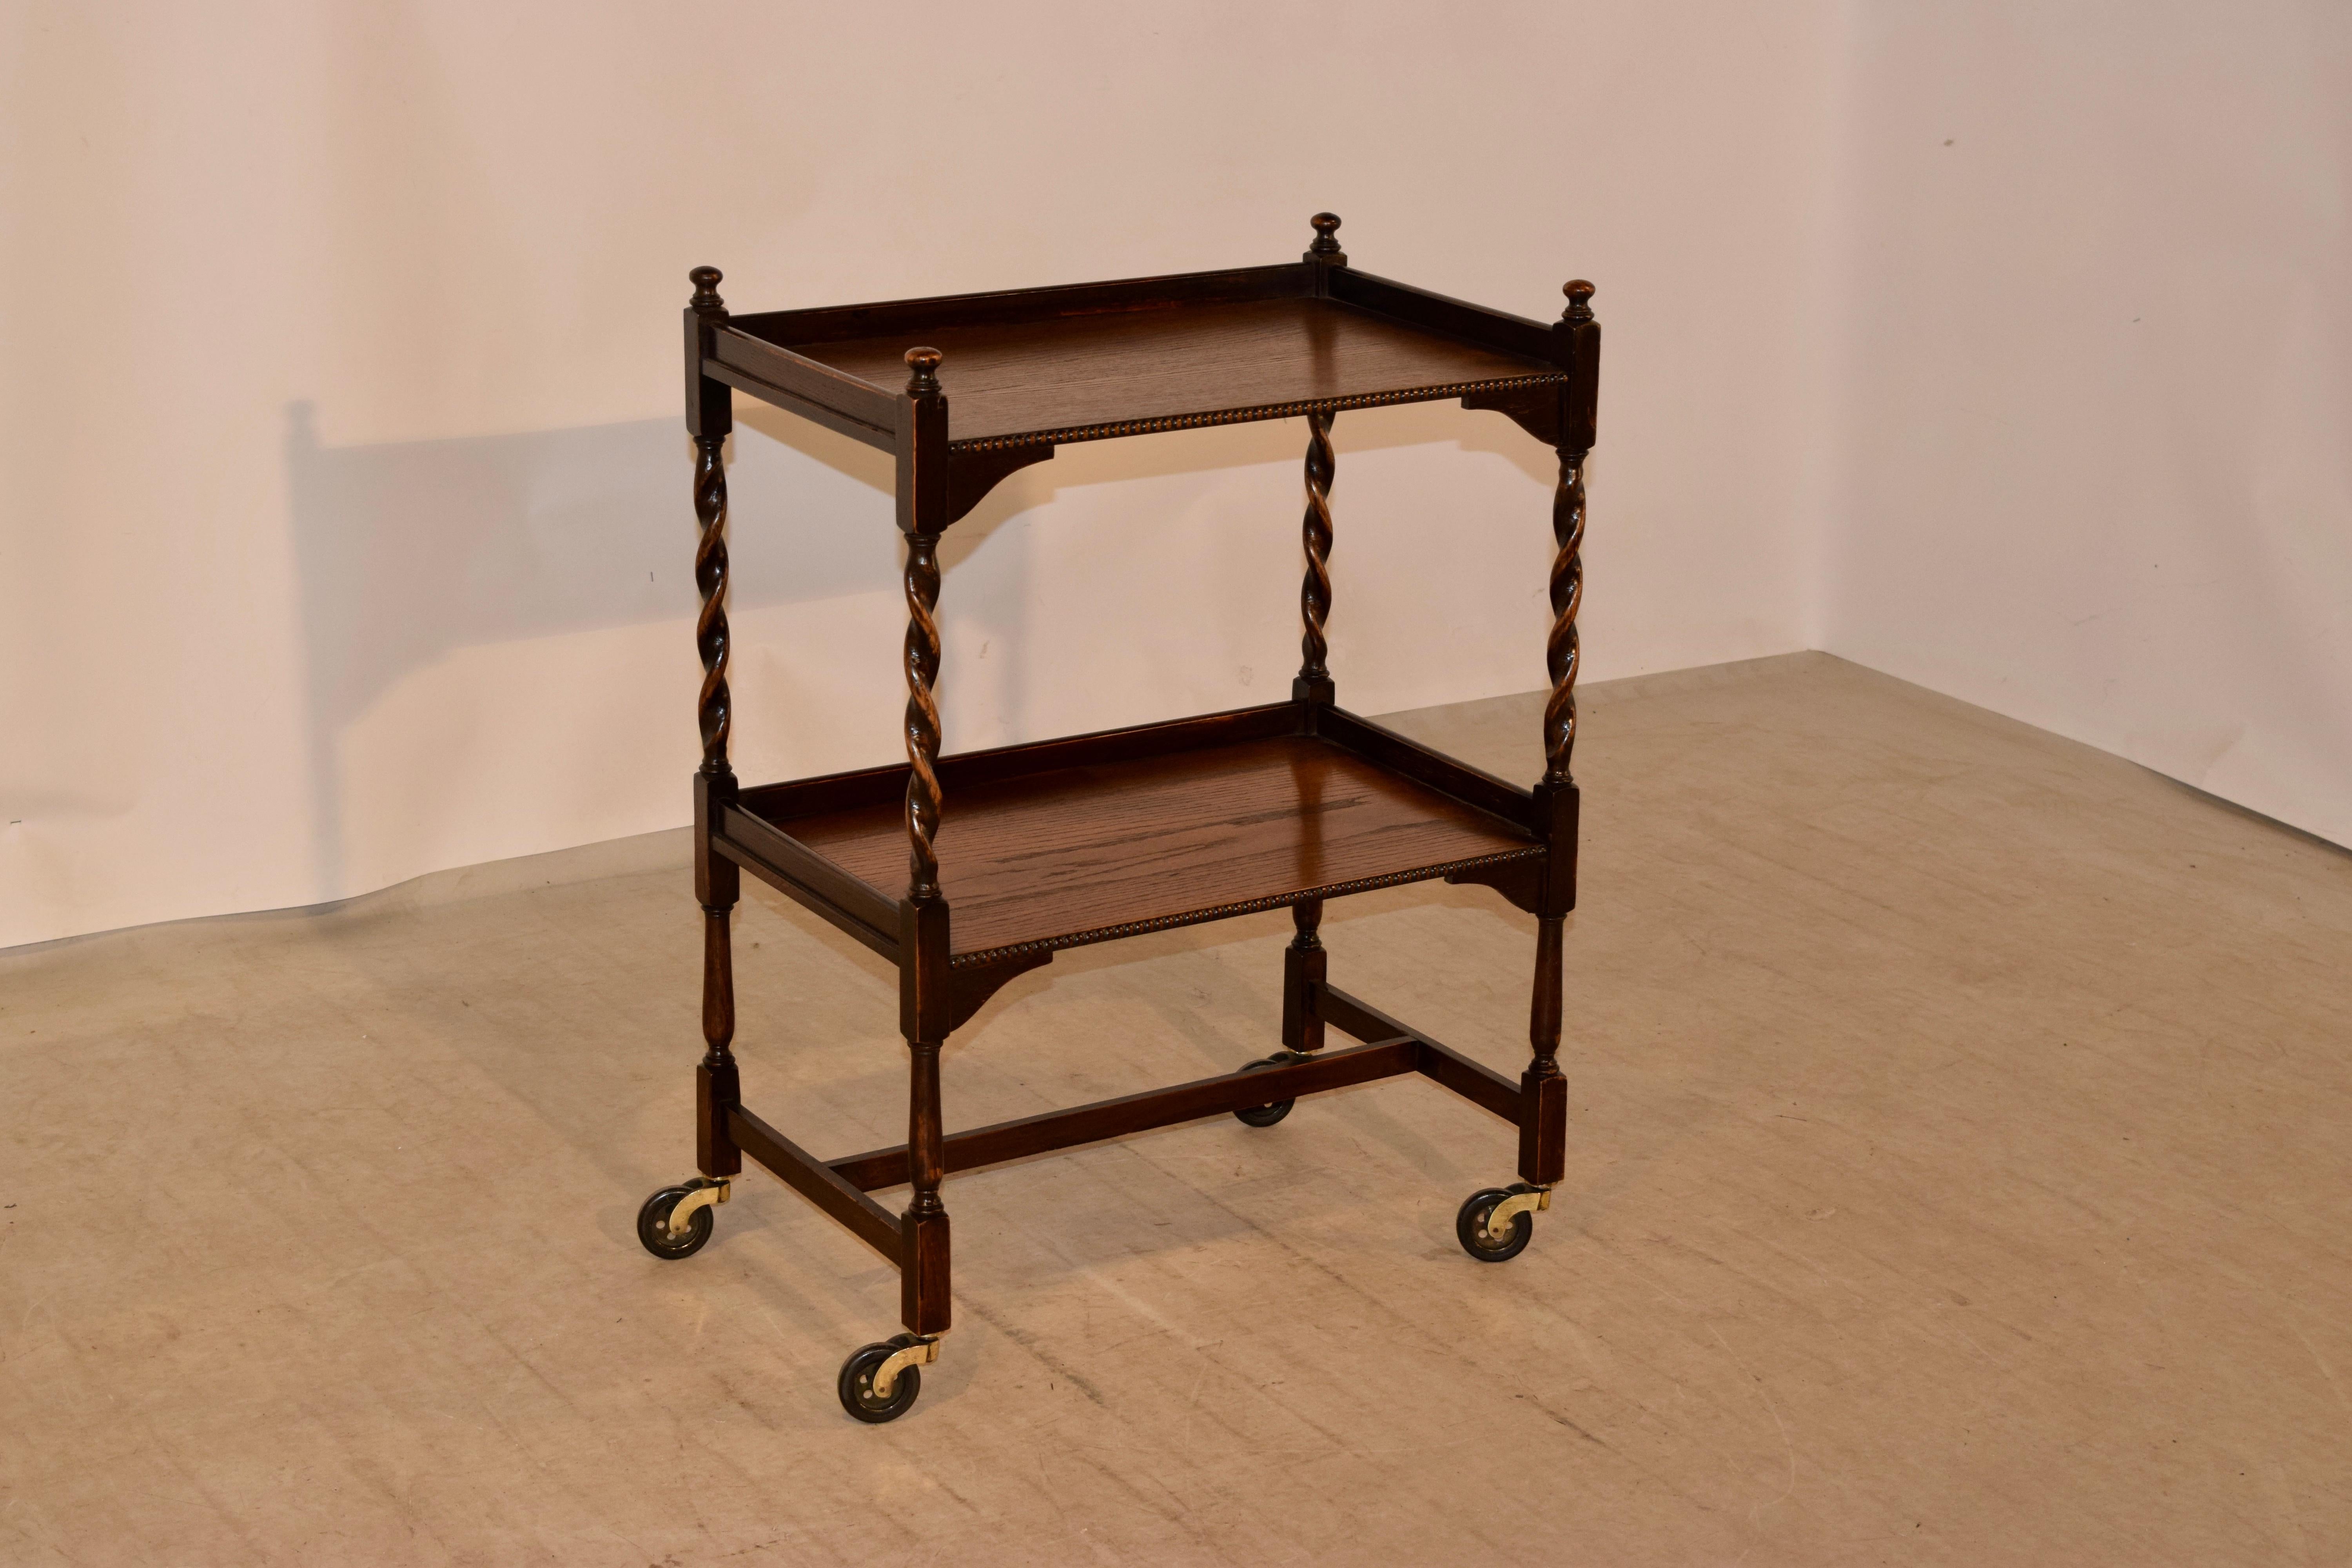 English oak drinks cart, circa 1900 with finials decorating the top following down to two shelves, both with galleries and beaded edges along the fronts. The shelves are separated by hand-turned barley twist shelf supports. The legs are hand-turned